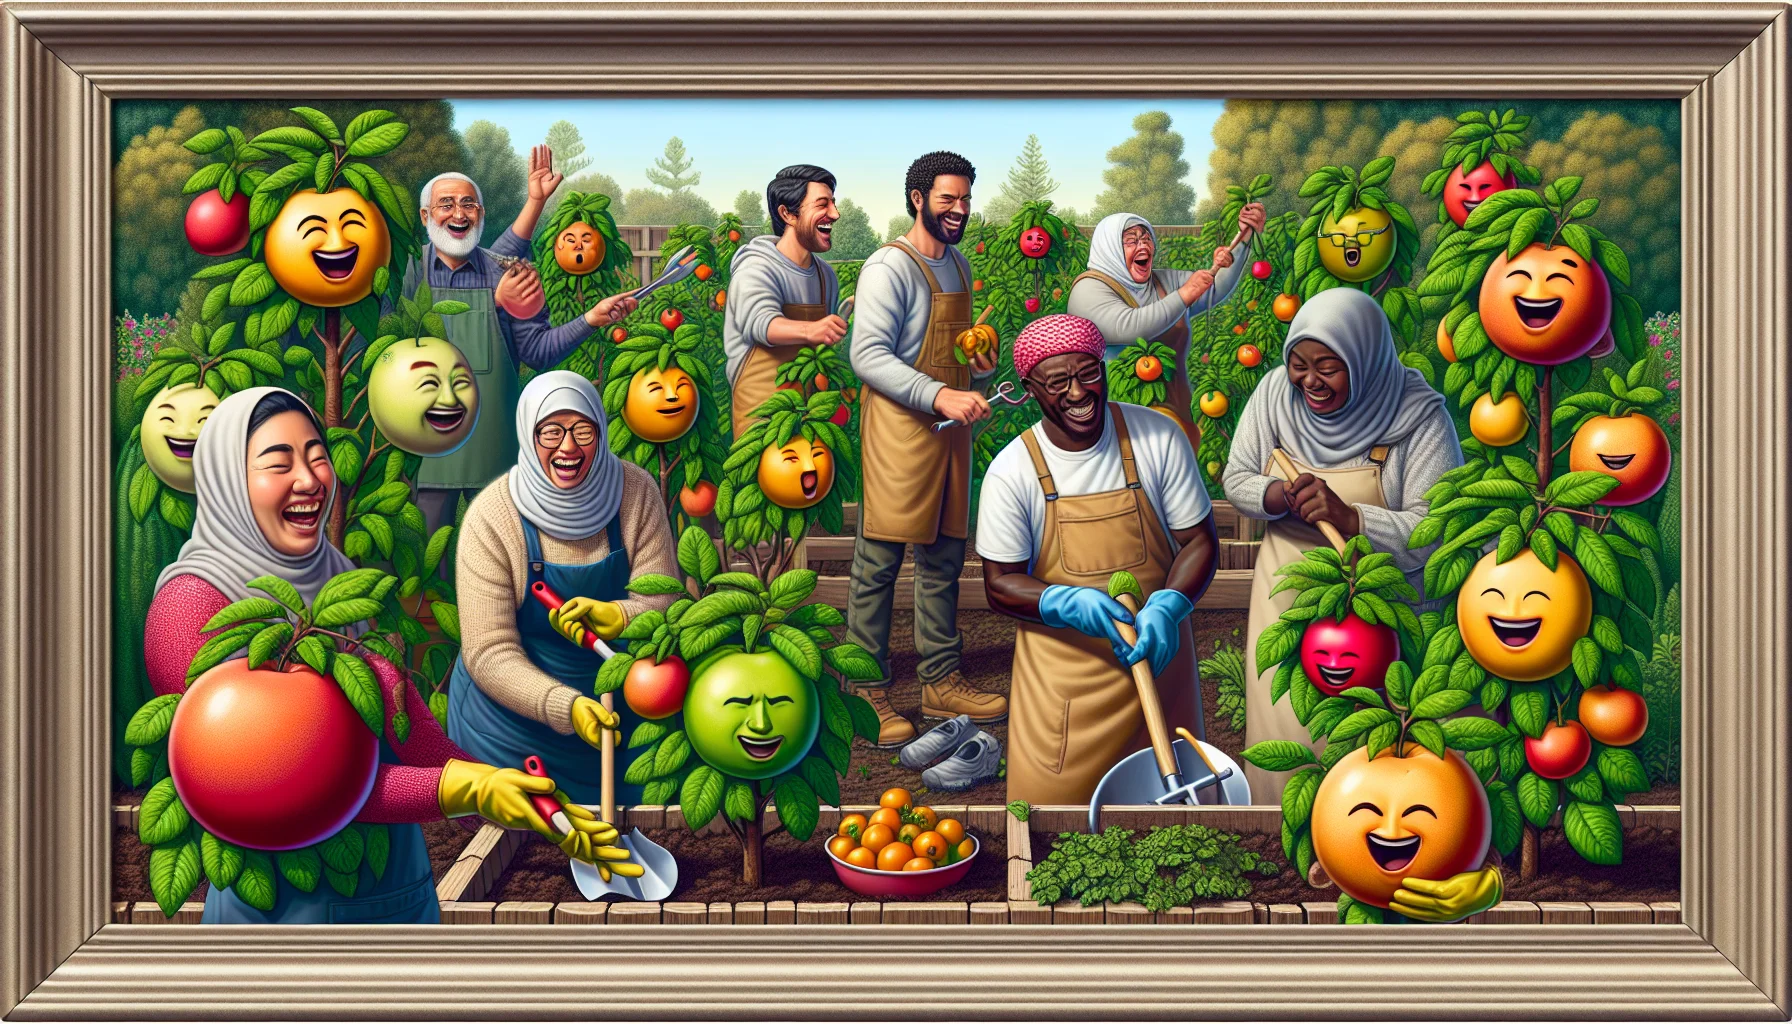 Create a detailed and realistic image that depicts Durham fruit plants in an amusing scenario aimed at encouraging people to enjoy gardening. The frame should showcase a garden setting with multiple Durham fruit plants bearing vibrant, ripe fruit. There are people of various descents and genders, such as a Middle-Eastern woman, a Hispanic man, a Caucasian man, and a Black woman, joyfully engaged in gardening activities. They are laughing, swapping tools, pruning plants, or harvesting fruit. Some Durham fruit plants have come to life, wearing goofy expressions or sunglasses, evoking a playful and positive atmosphere.